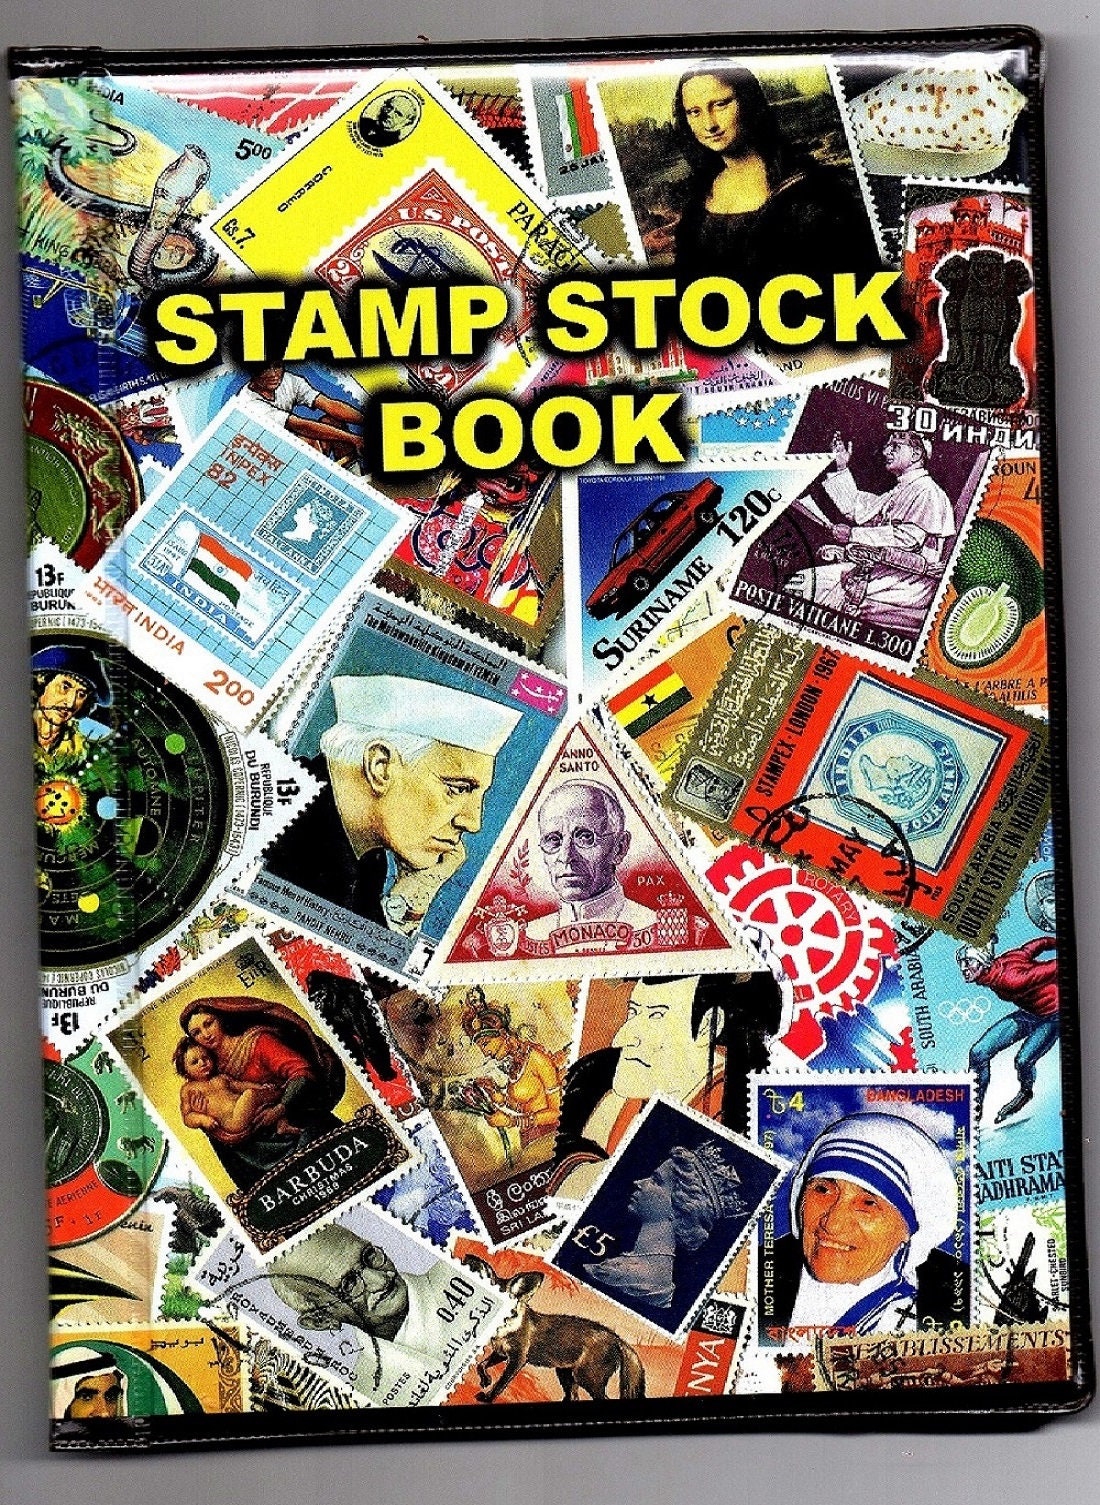 Stamp Album With 500 PCS, 200 Pcs, 100 Different World Wide Vintage Rare  Old Used CTO MNH Superb Postage Stamps Set Hobby Collection Lot -   Sweden